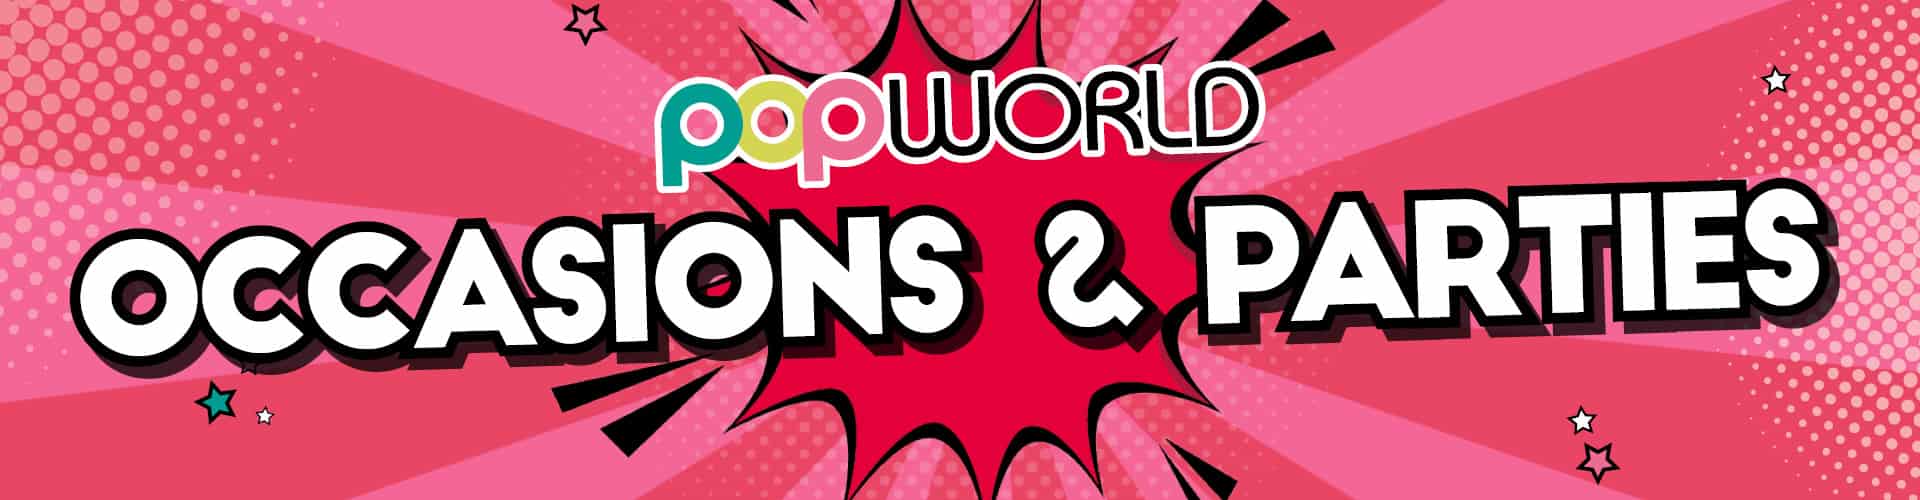 Occasions and Parties at Popworld Plymouth